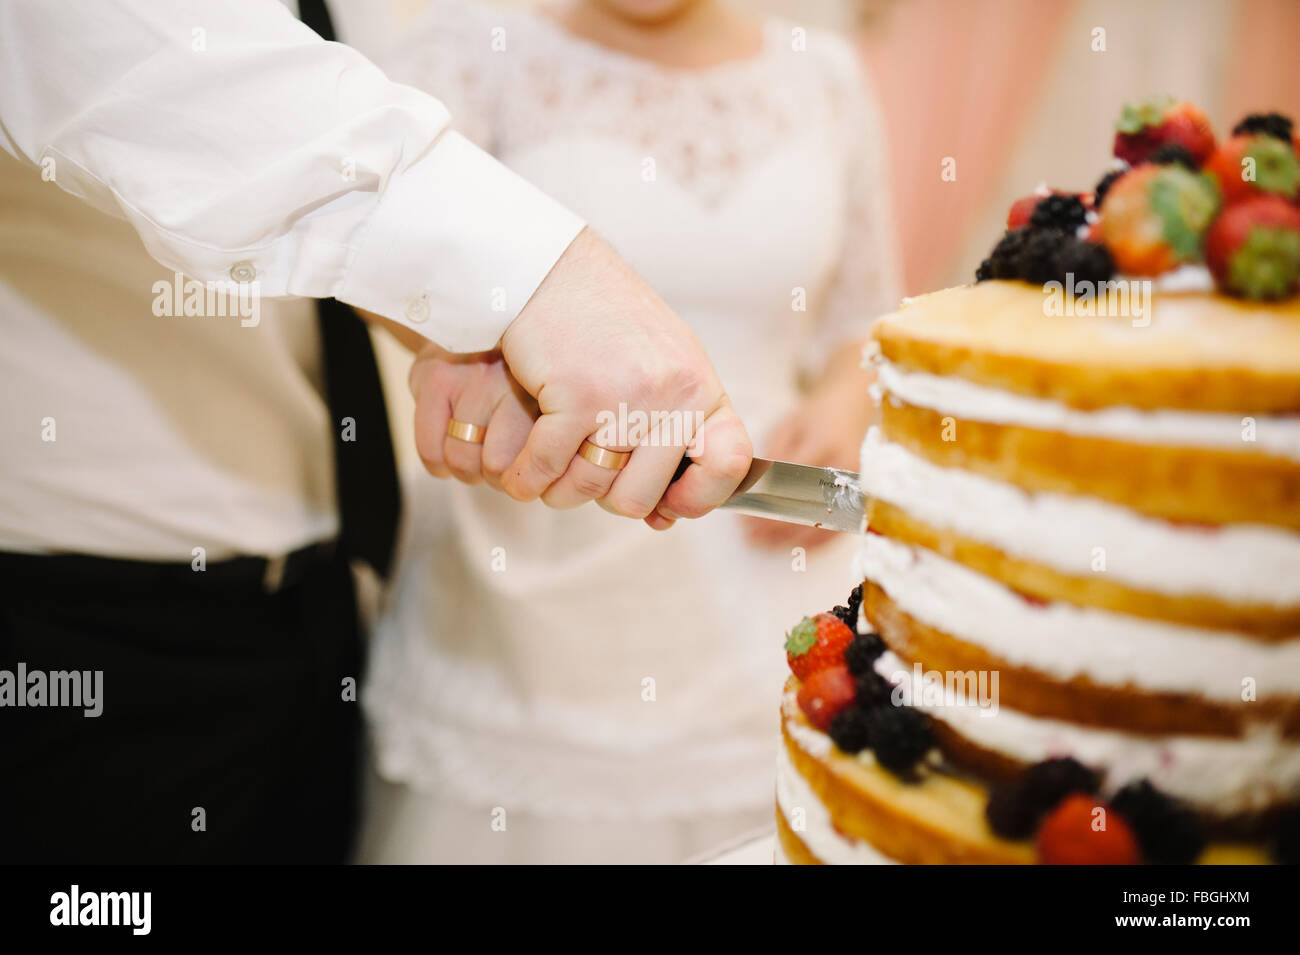 Bride and groom cut their wedding cake together Stock Photo